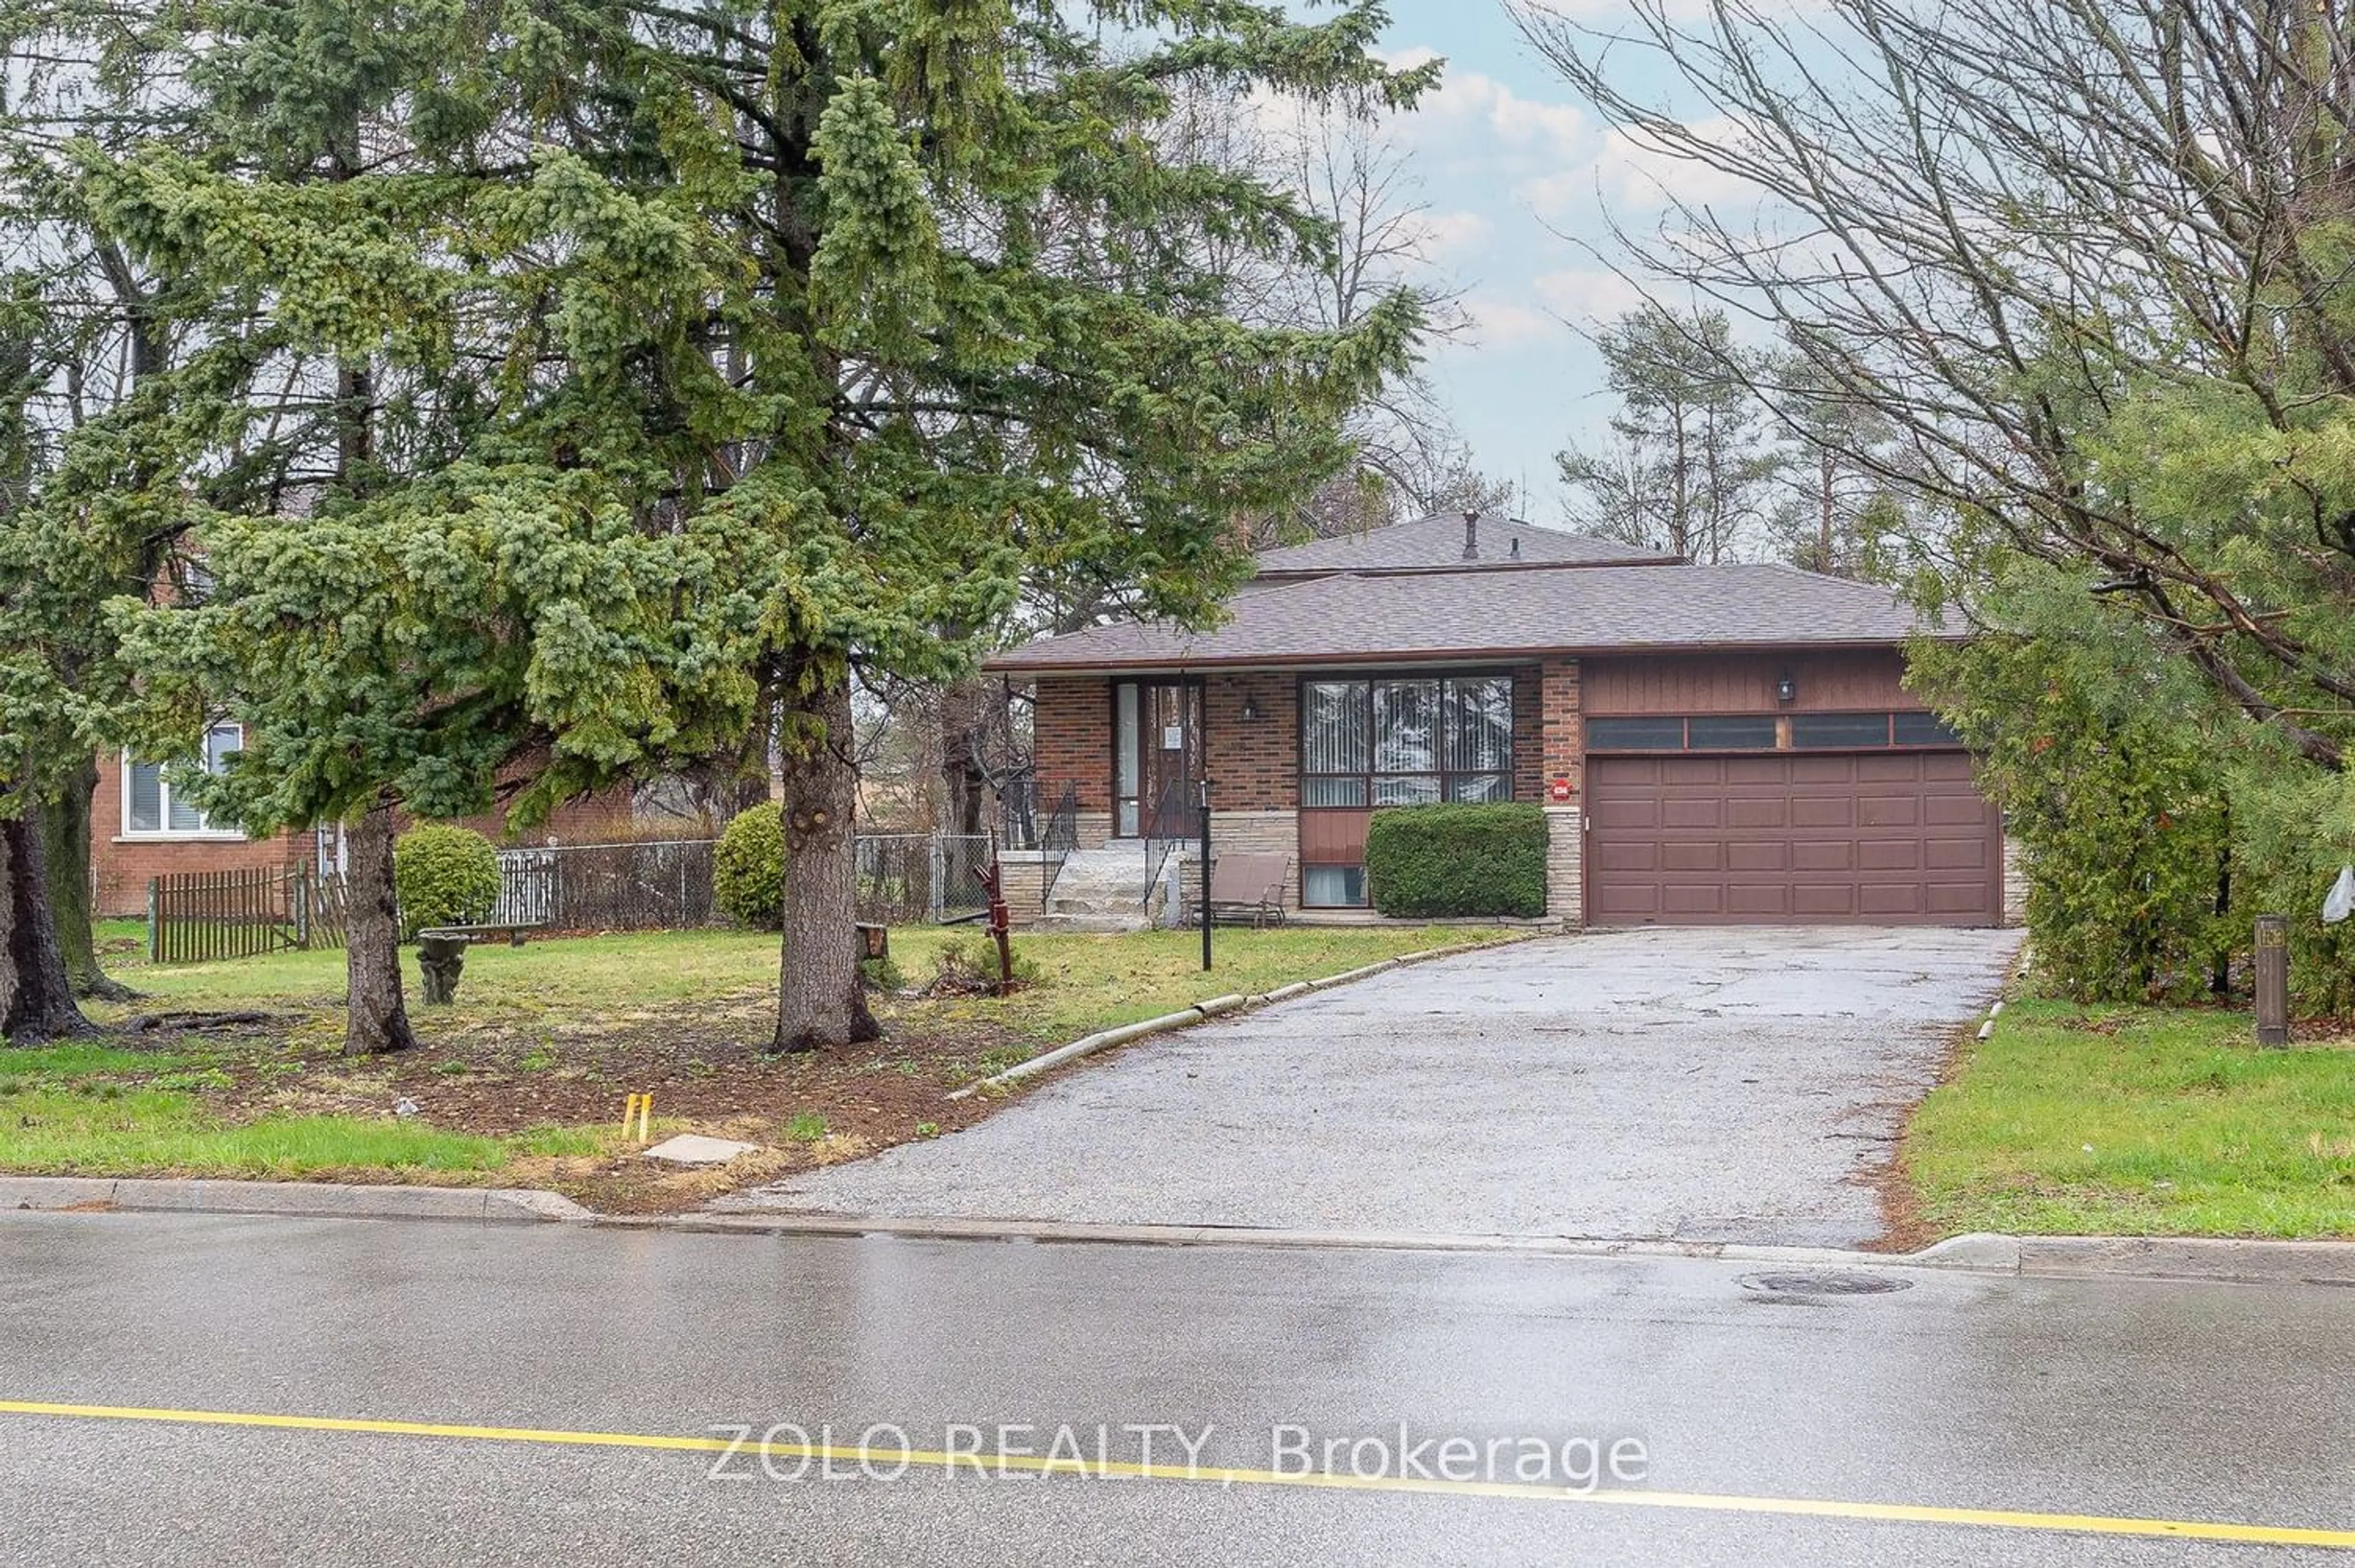 Home with brick exterior material for 656 Sheppard Ave, Pickering Ontario L1V 1G3